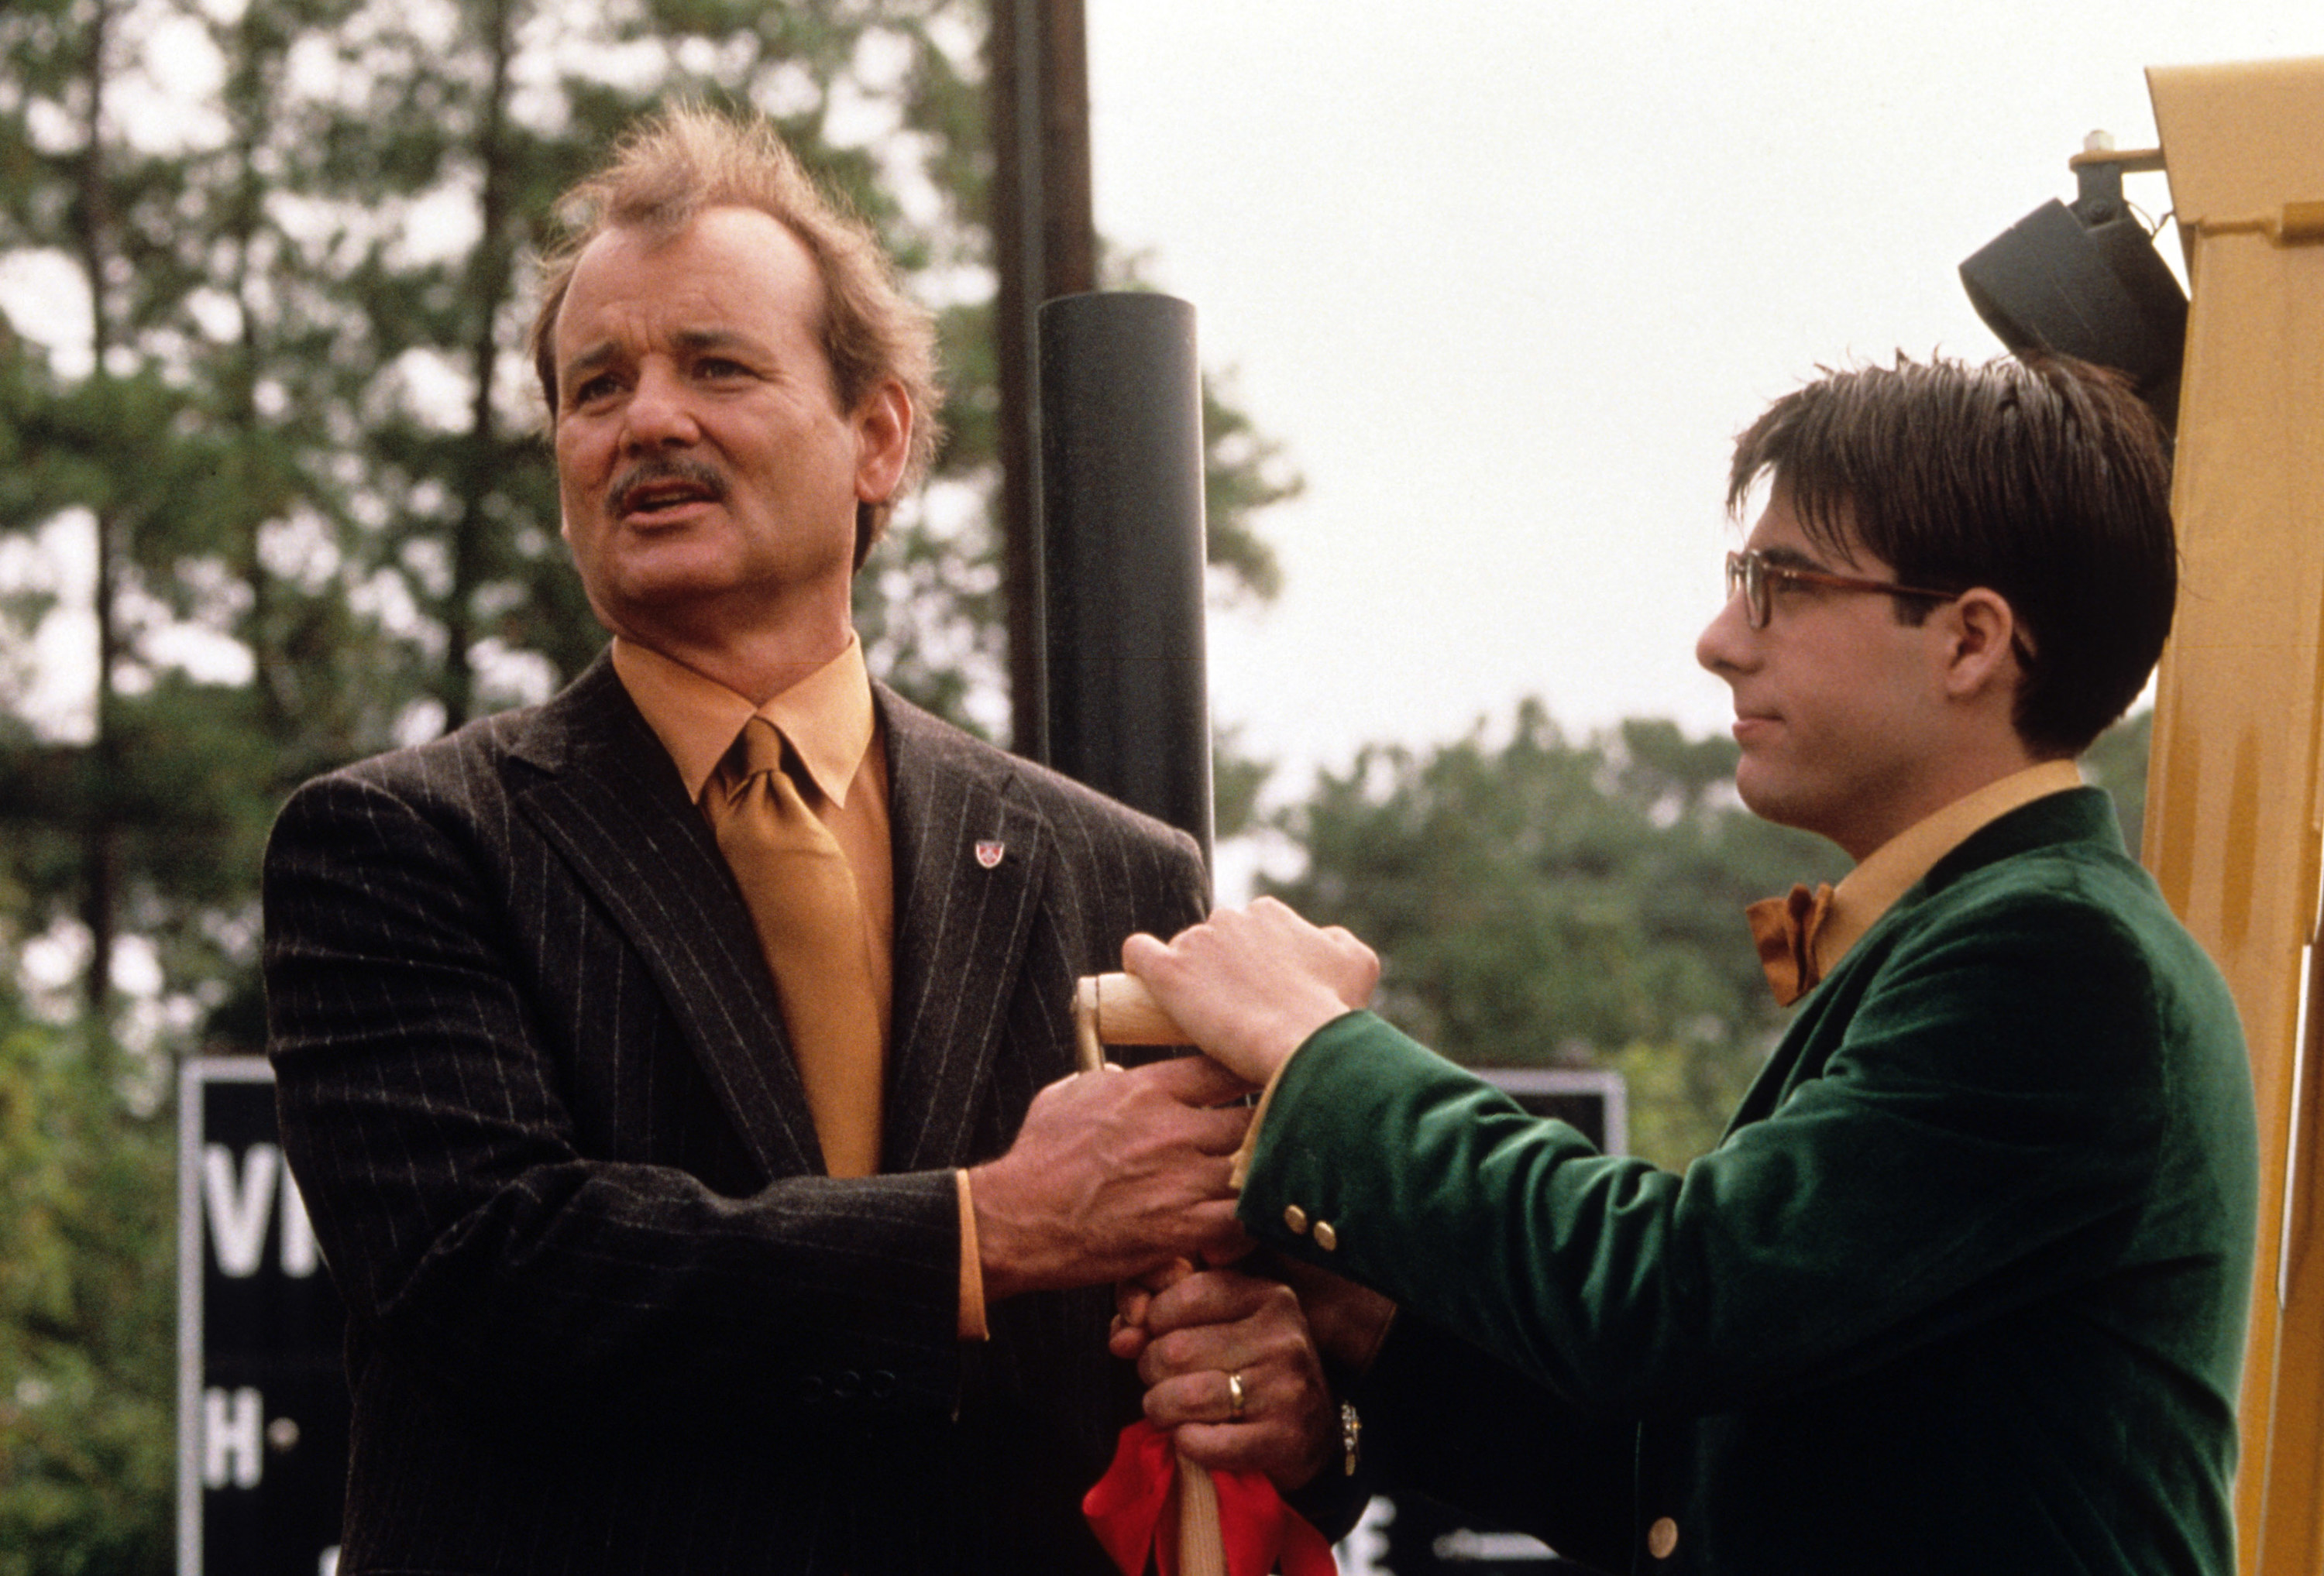 Bill Murray and Jason Schwartzman hold the handle of a shovel together